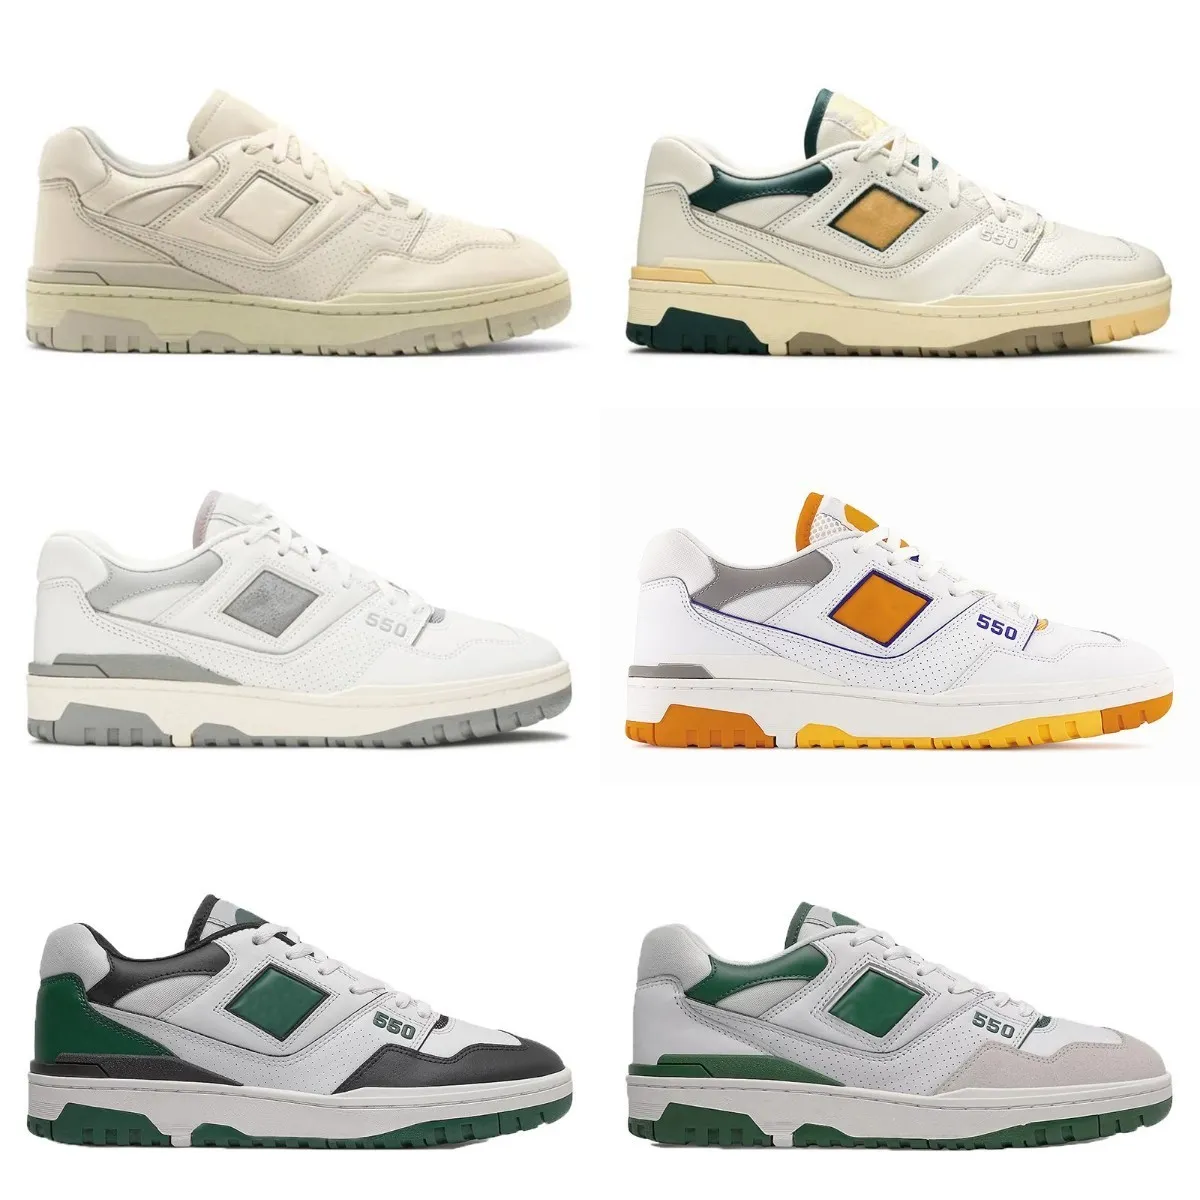 Designer New BB550 B550 550 Casual Shoes Mens Women White Green Yellow Evergreen Burgogne Cyan Au Lait Auralee Silver Rich Paul Oak Leaf Lakers Pack Trainer Sneakers